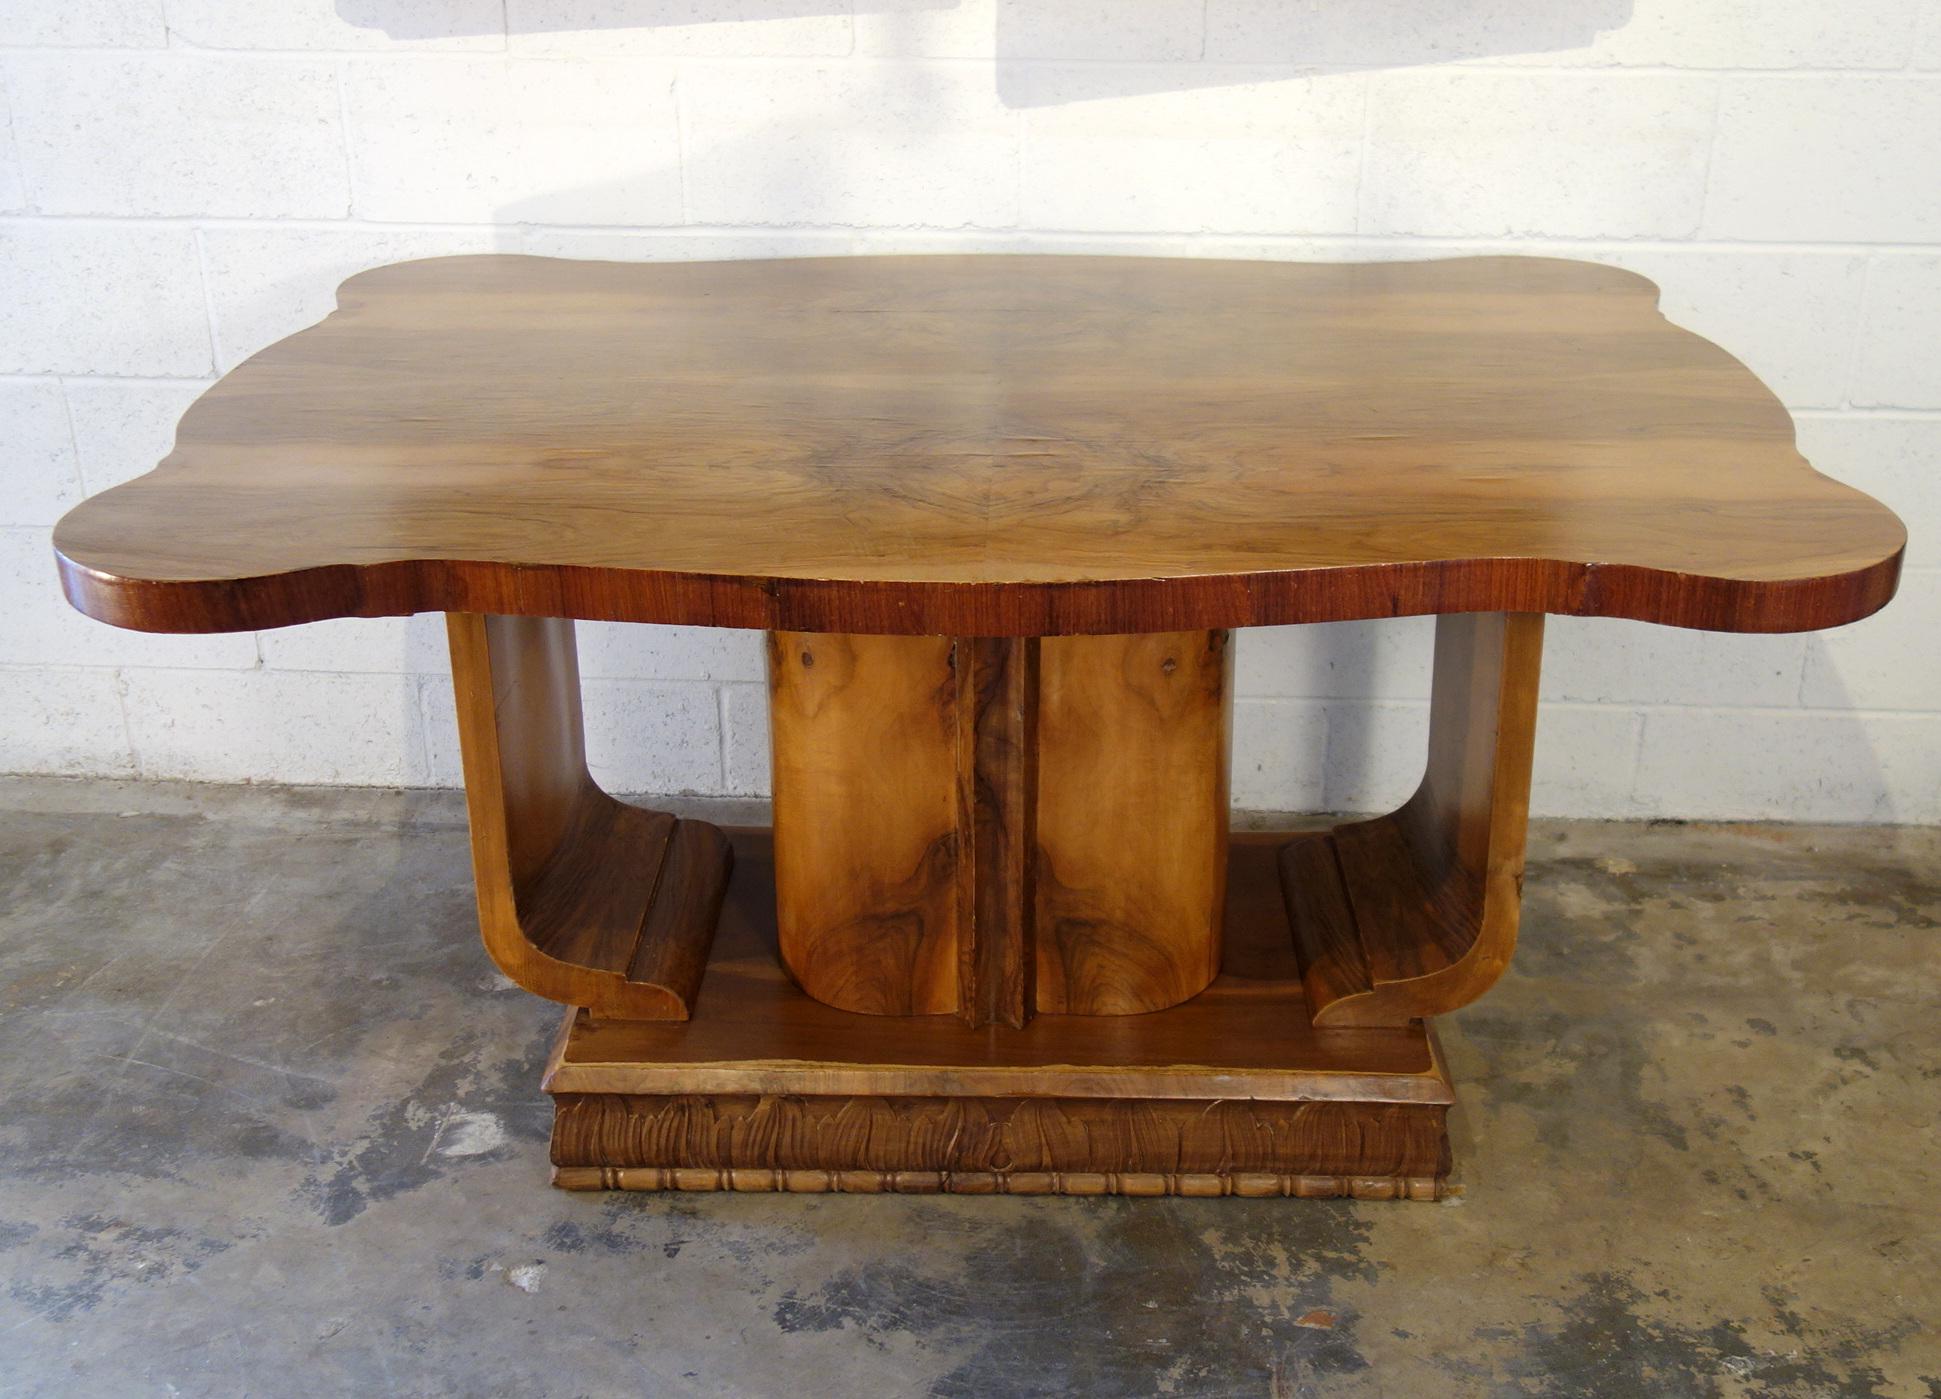 A playful, decorative Art Deco entrance table features a symphony of book match and butterfly patterns composed of walnut burl veneers. The structural orchestration involves an oval central column within arched side pedestal supports, all rising